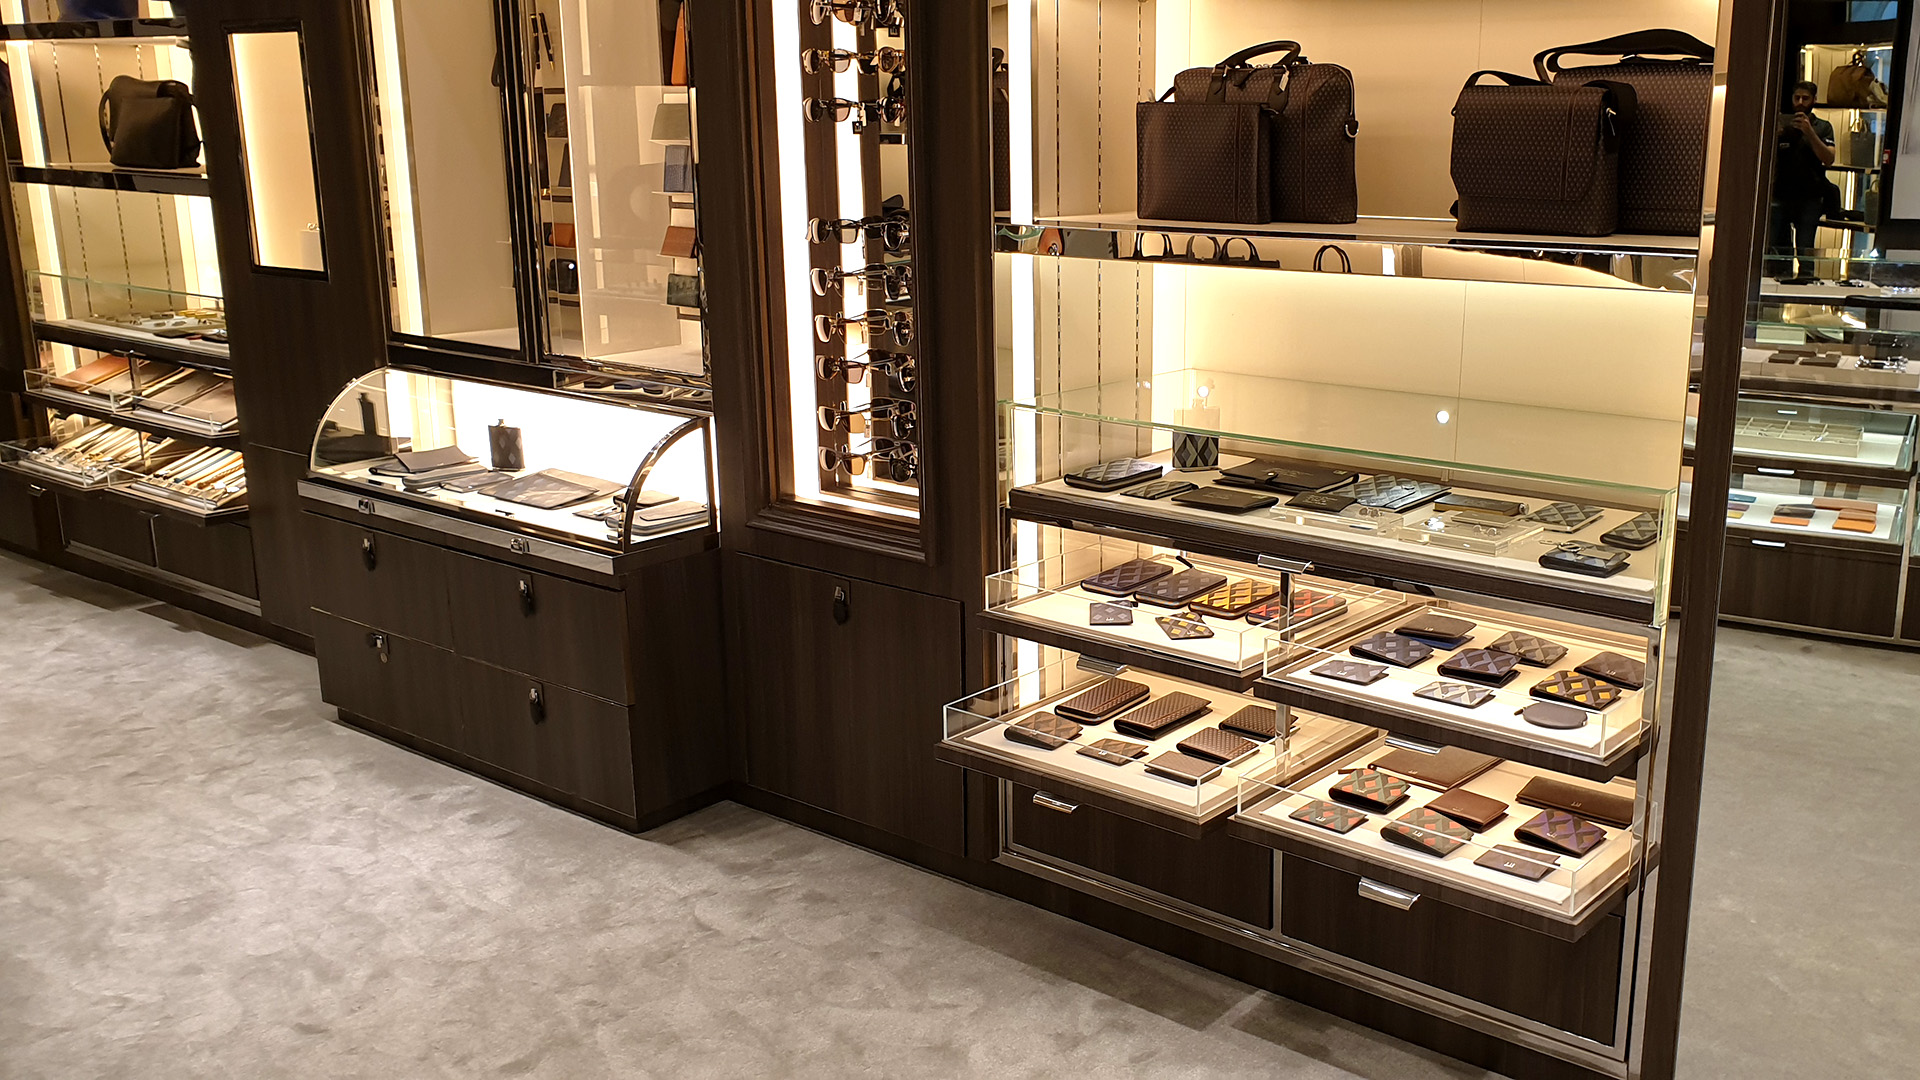 Refurbished Interior for Dunhill in Villagio using 3M DiNOC - implemented by ME Visual, Qatar